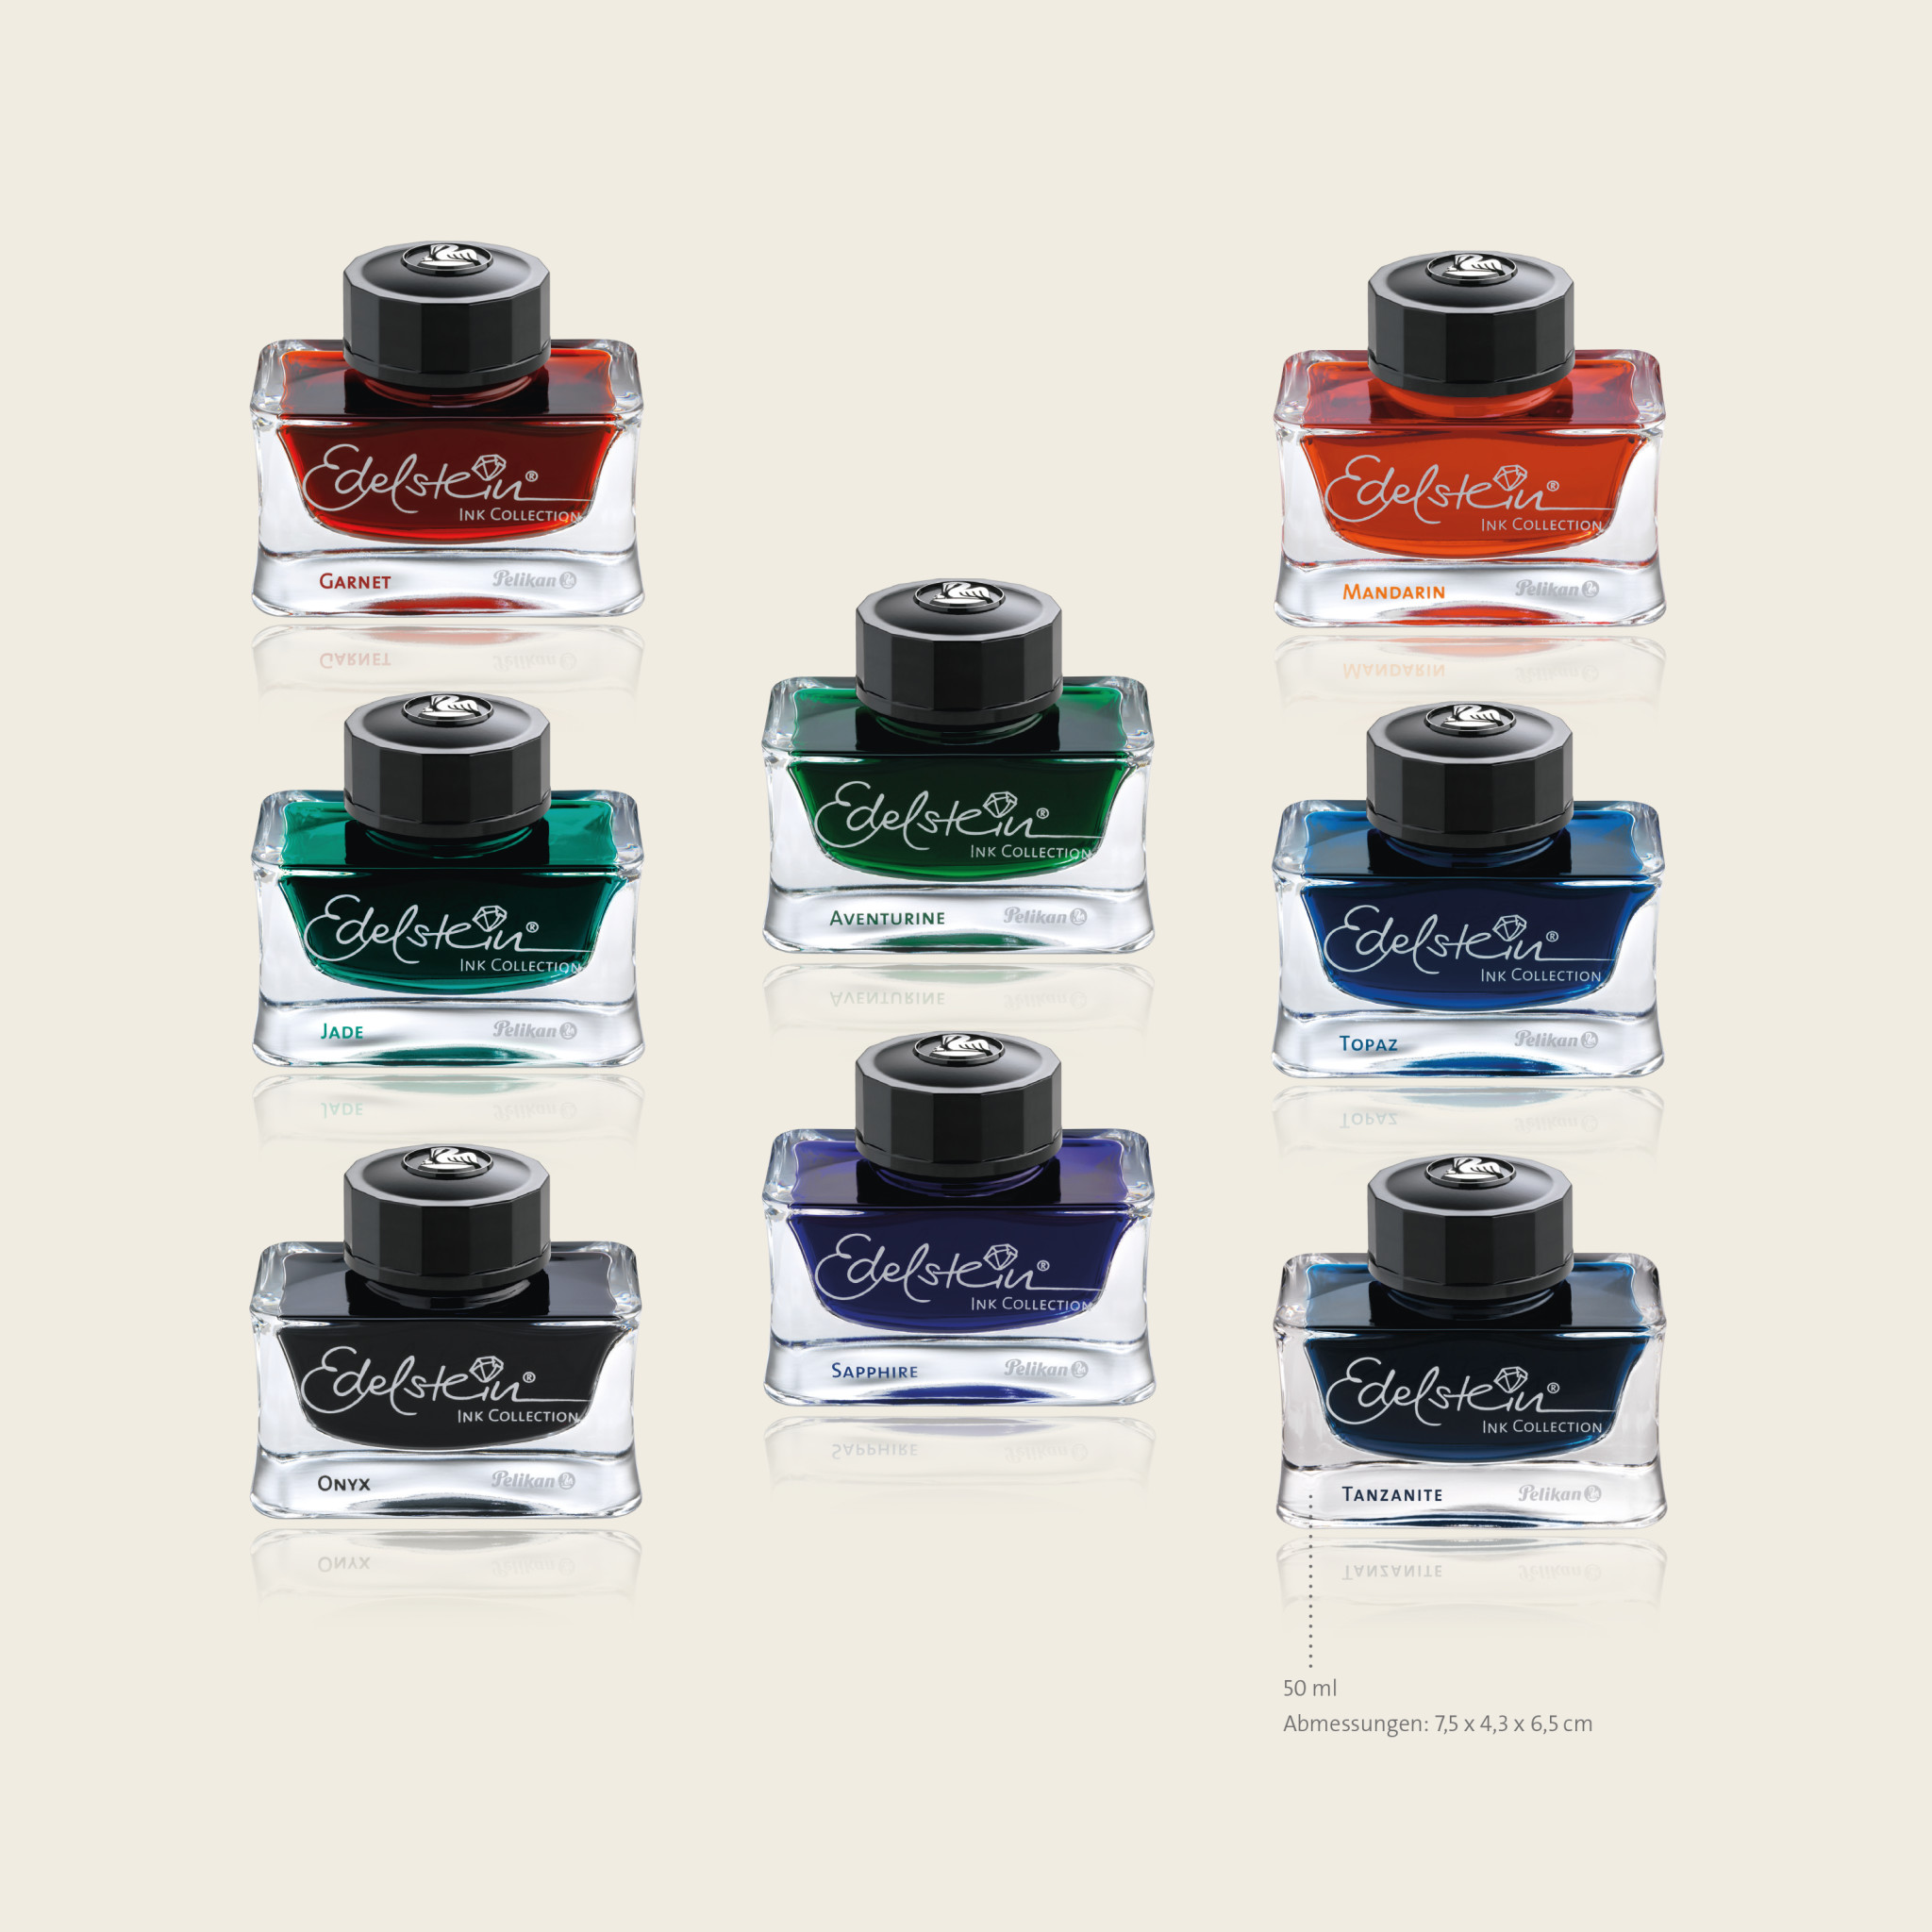 Pelikan Perlen® Ink Collection contains 8 glasses